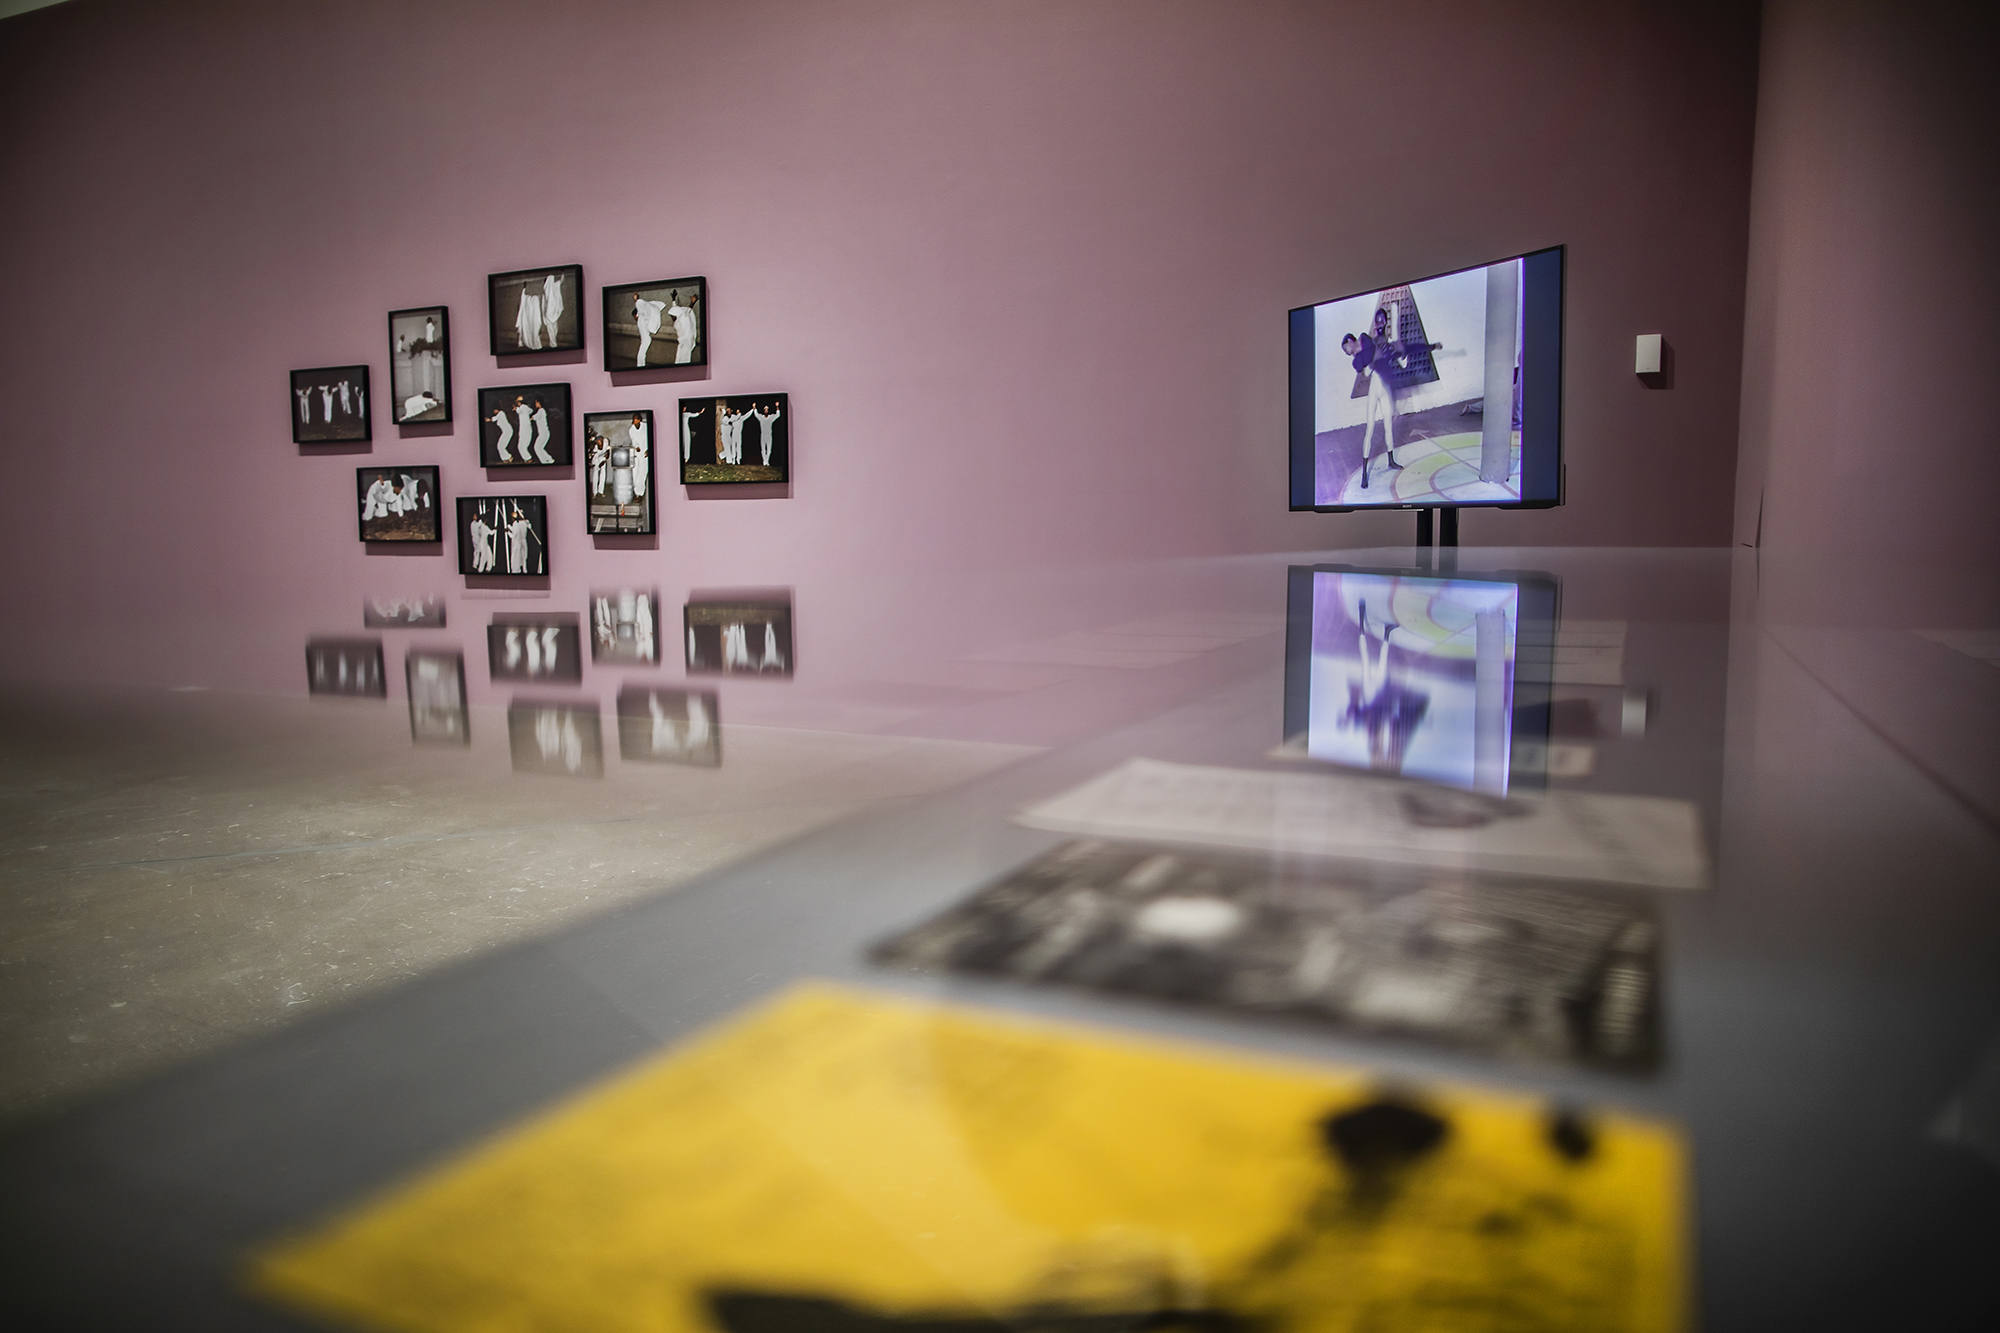 Video screen and photographs hung on a wall